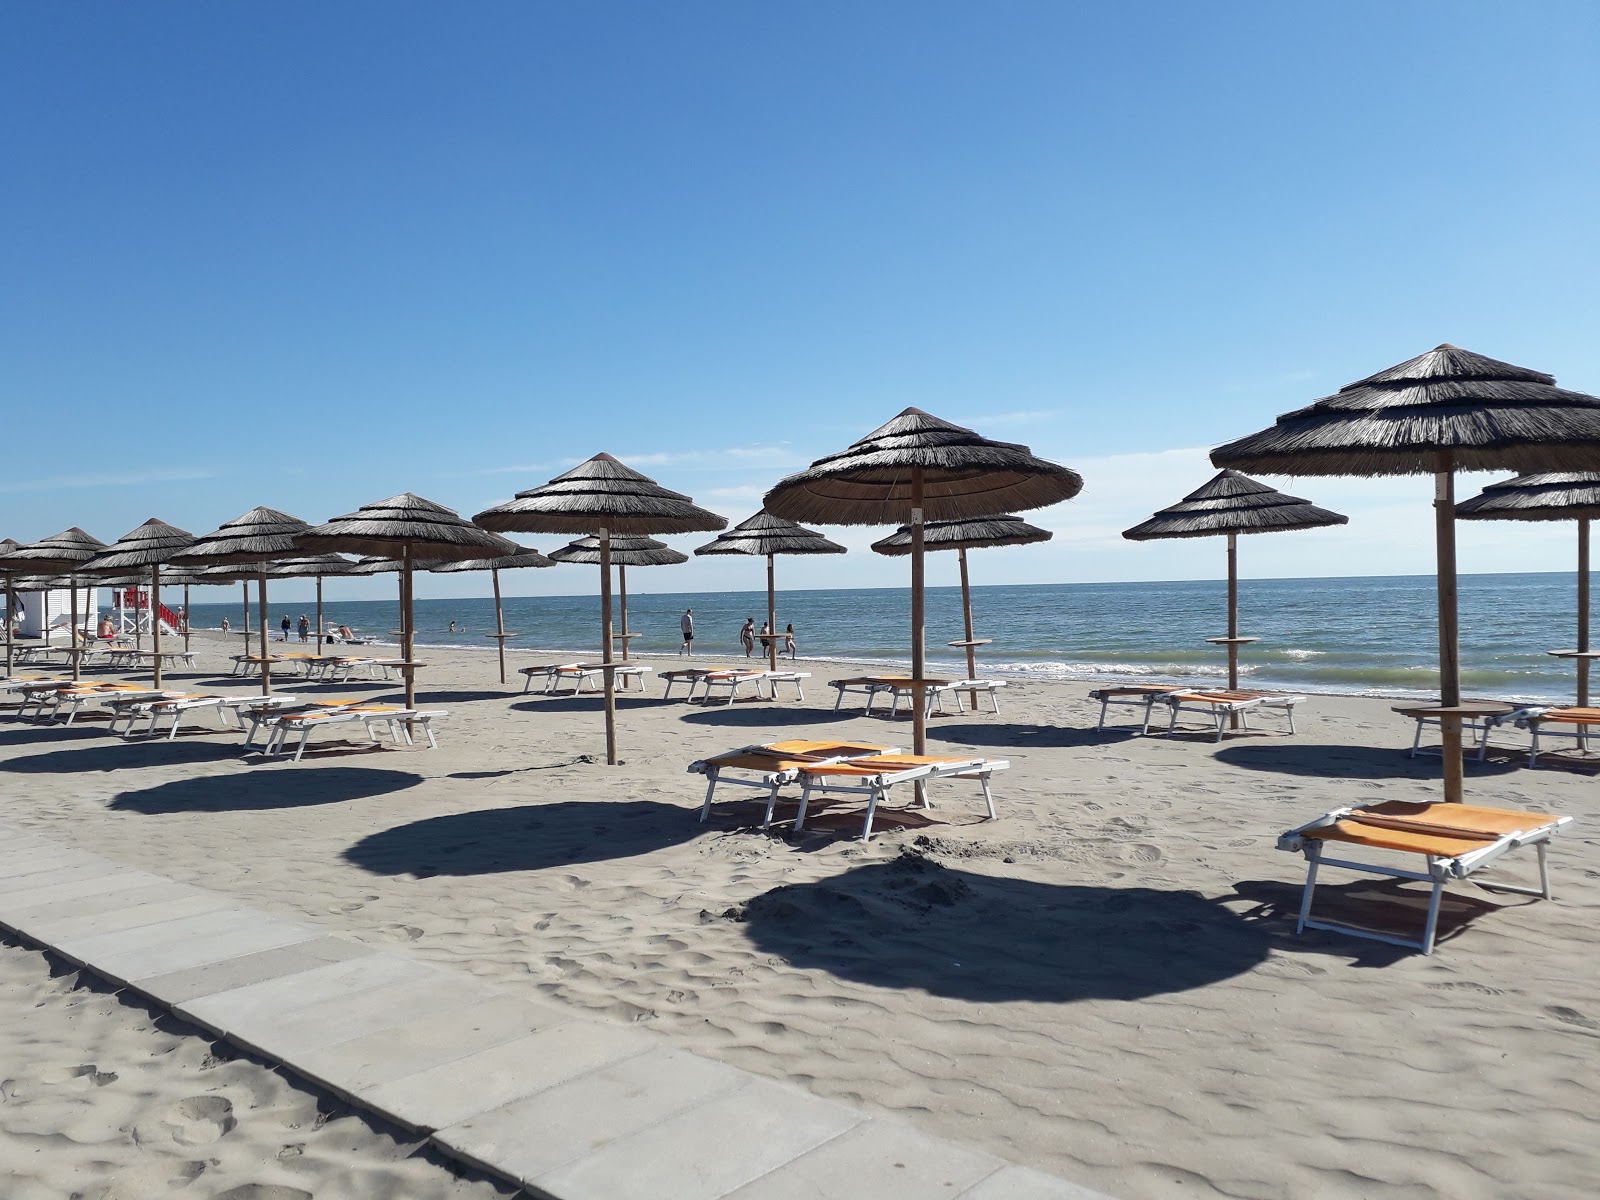 Foto af Spiaggia di Comacchio med lys fint sand overflade